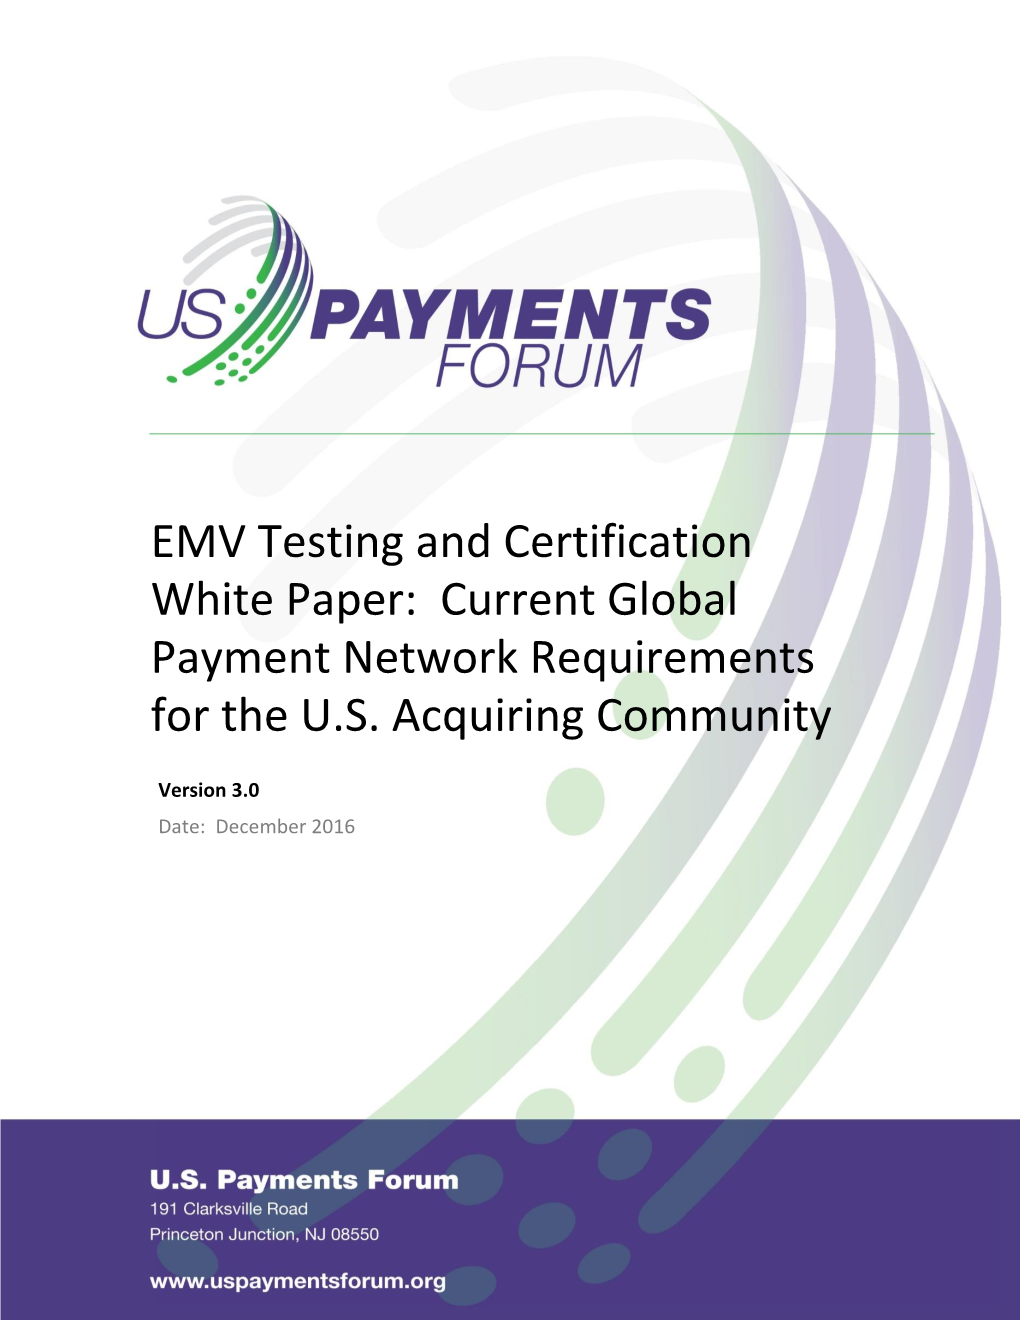 EMV Testing and Certification White Paper: Current Global Payment Network Requirements for the U.S